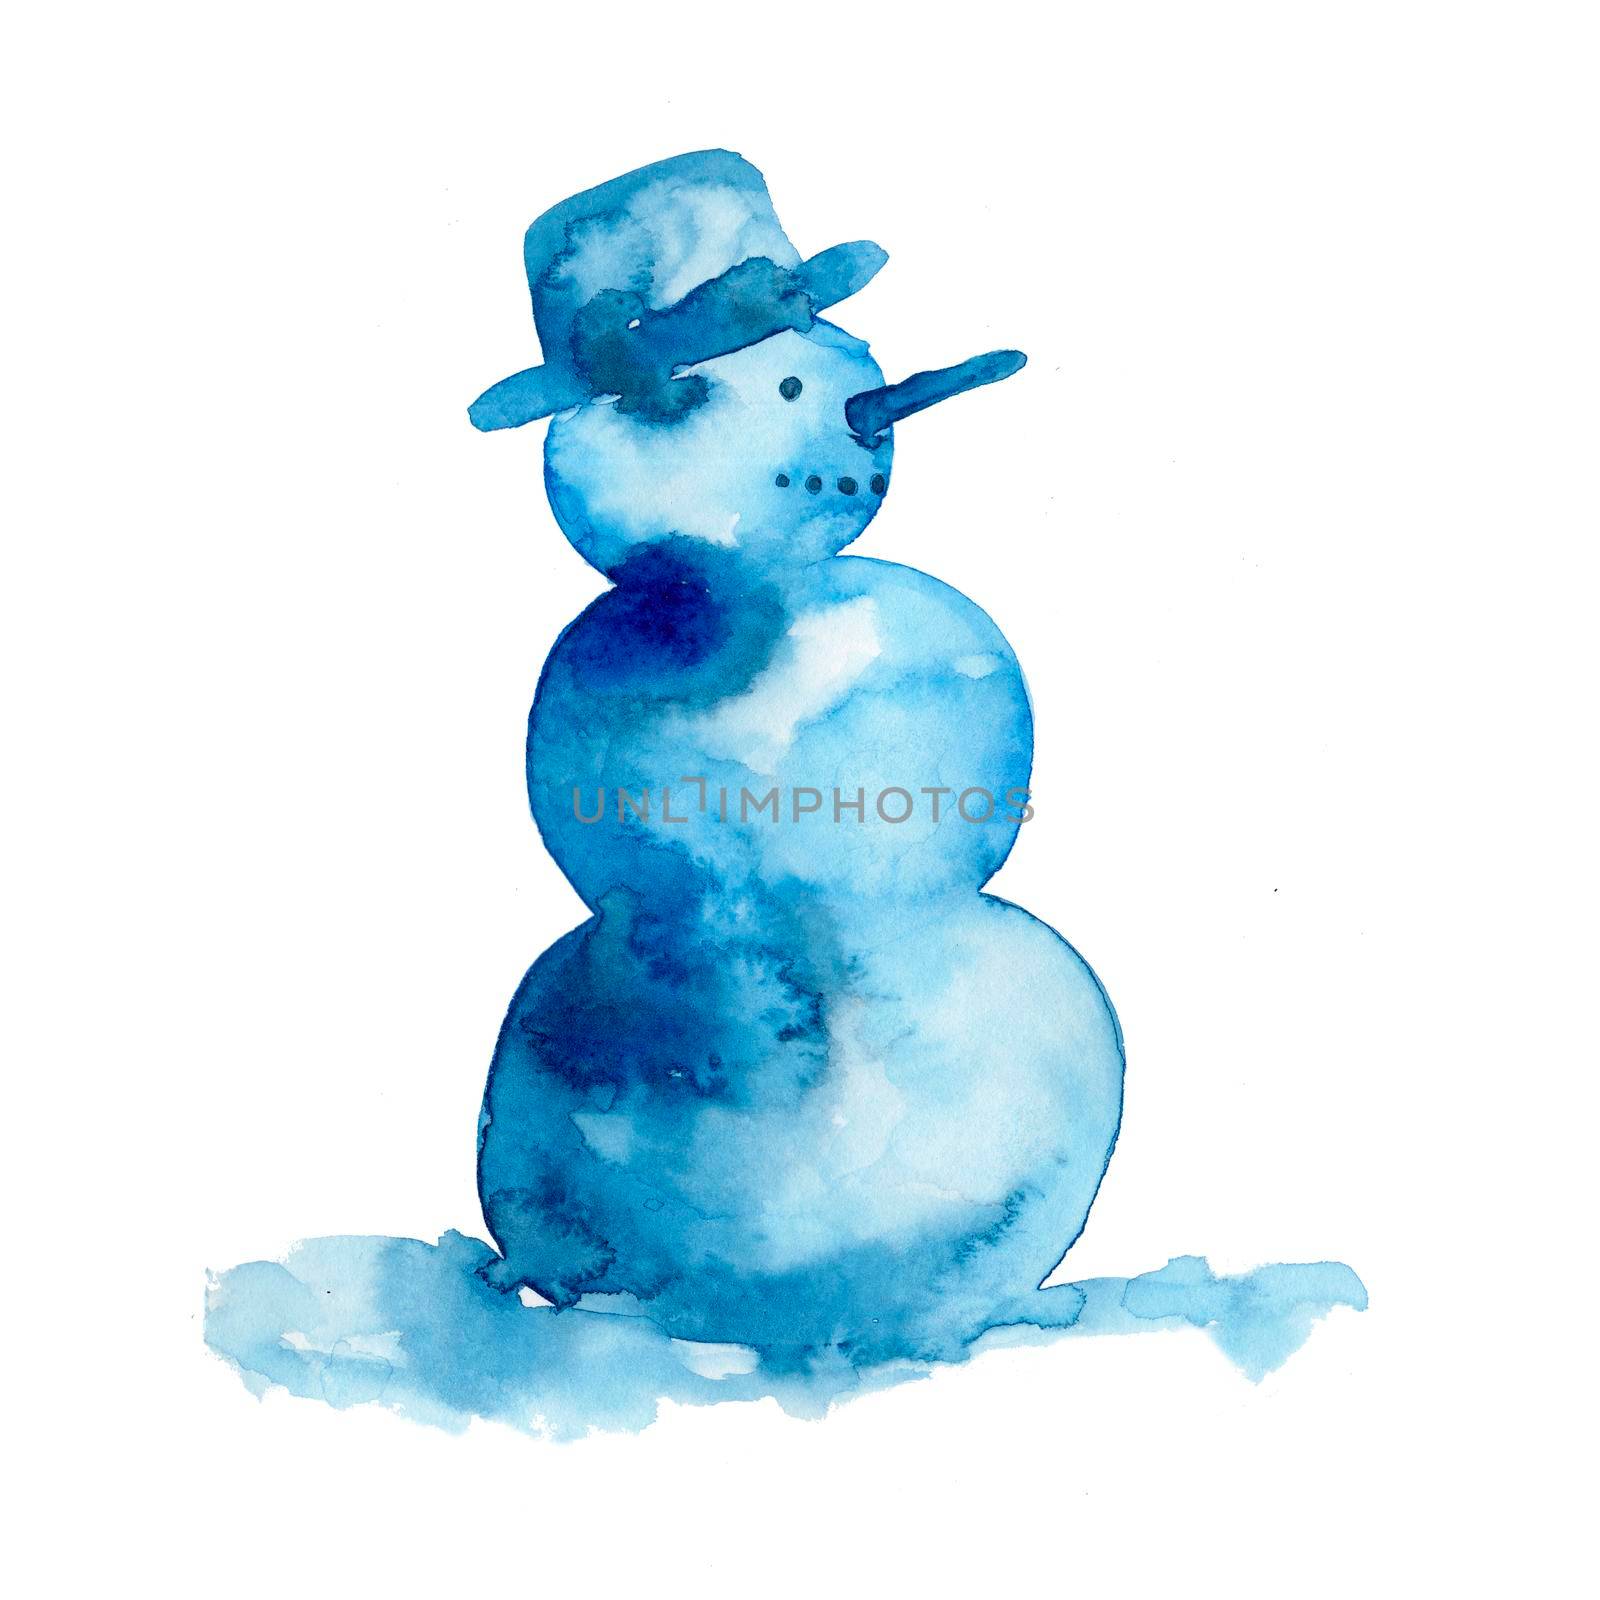 Watercolor illustration with christmas snowman in blue color. New year holiday symbol isolated on white background. Snow character with carrot and hat. Hand art painted element for card by DesignAB